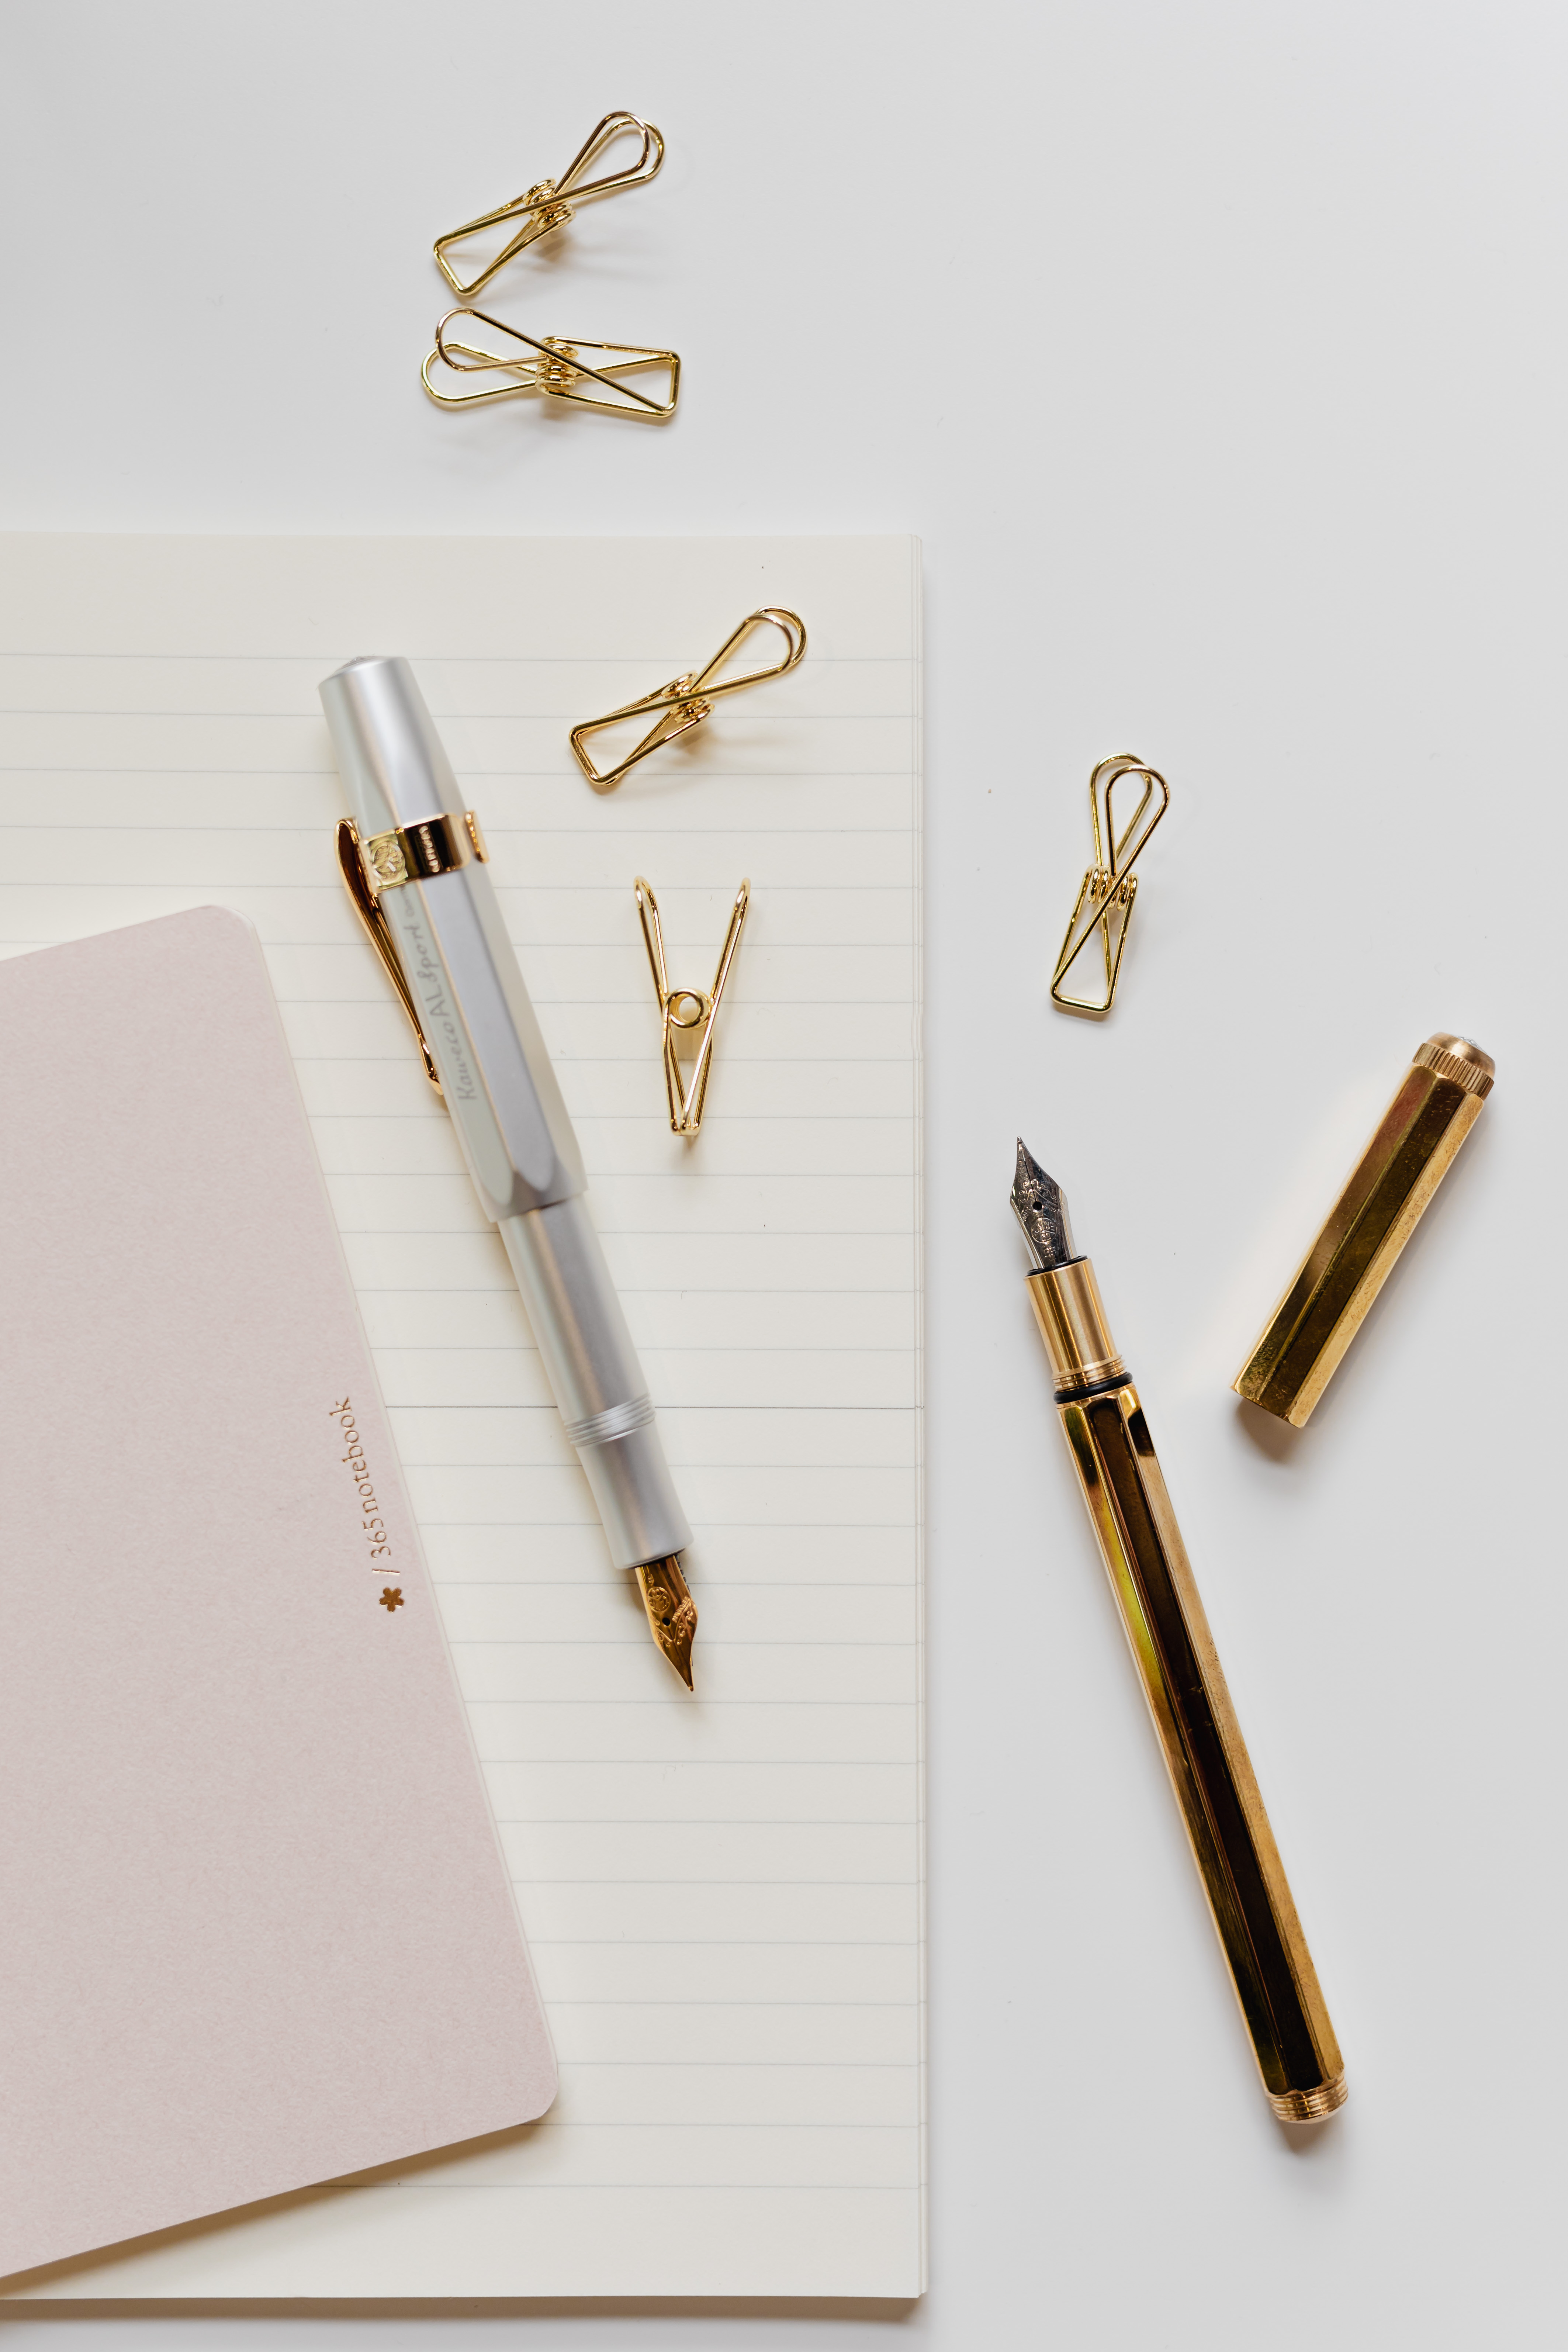 Fountain pens, clips and notebooks on a white desk